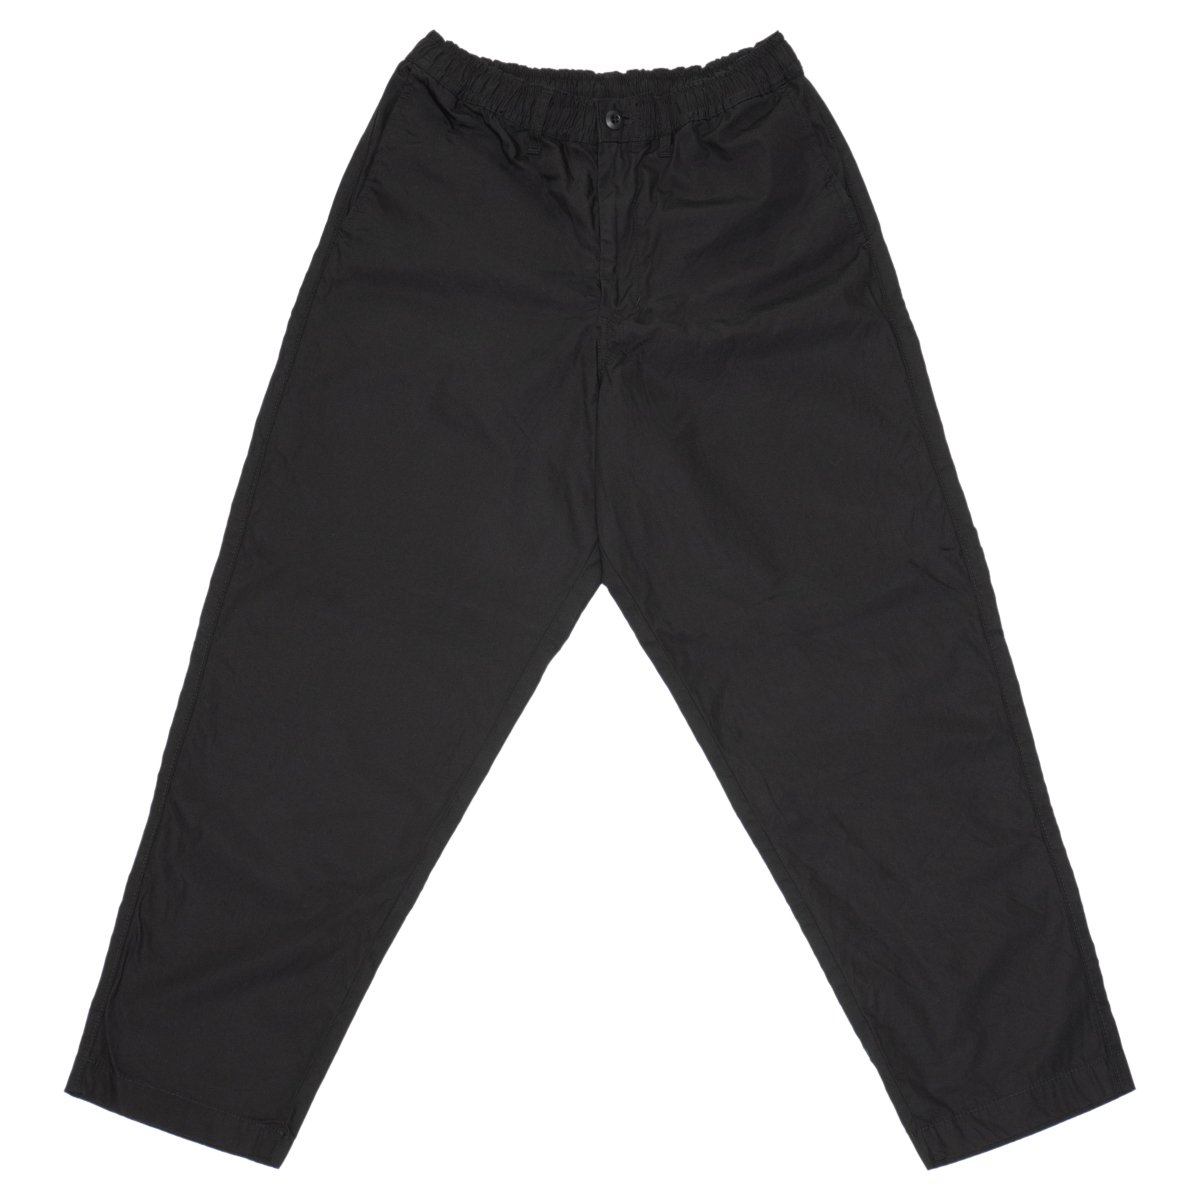 Light Cotton Easy Pants - Black - CUP AND CONE